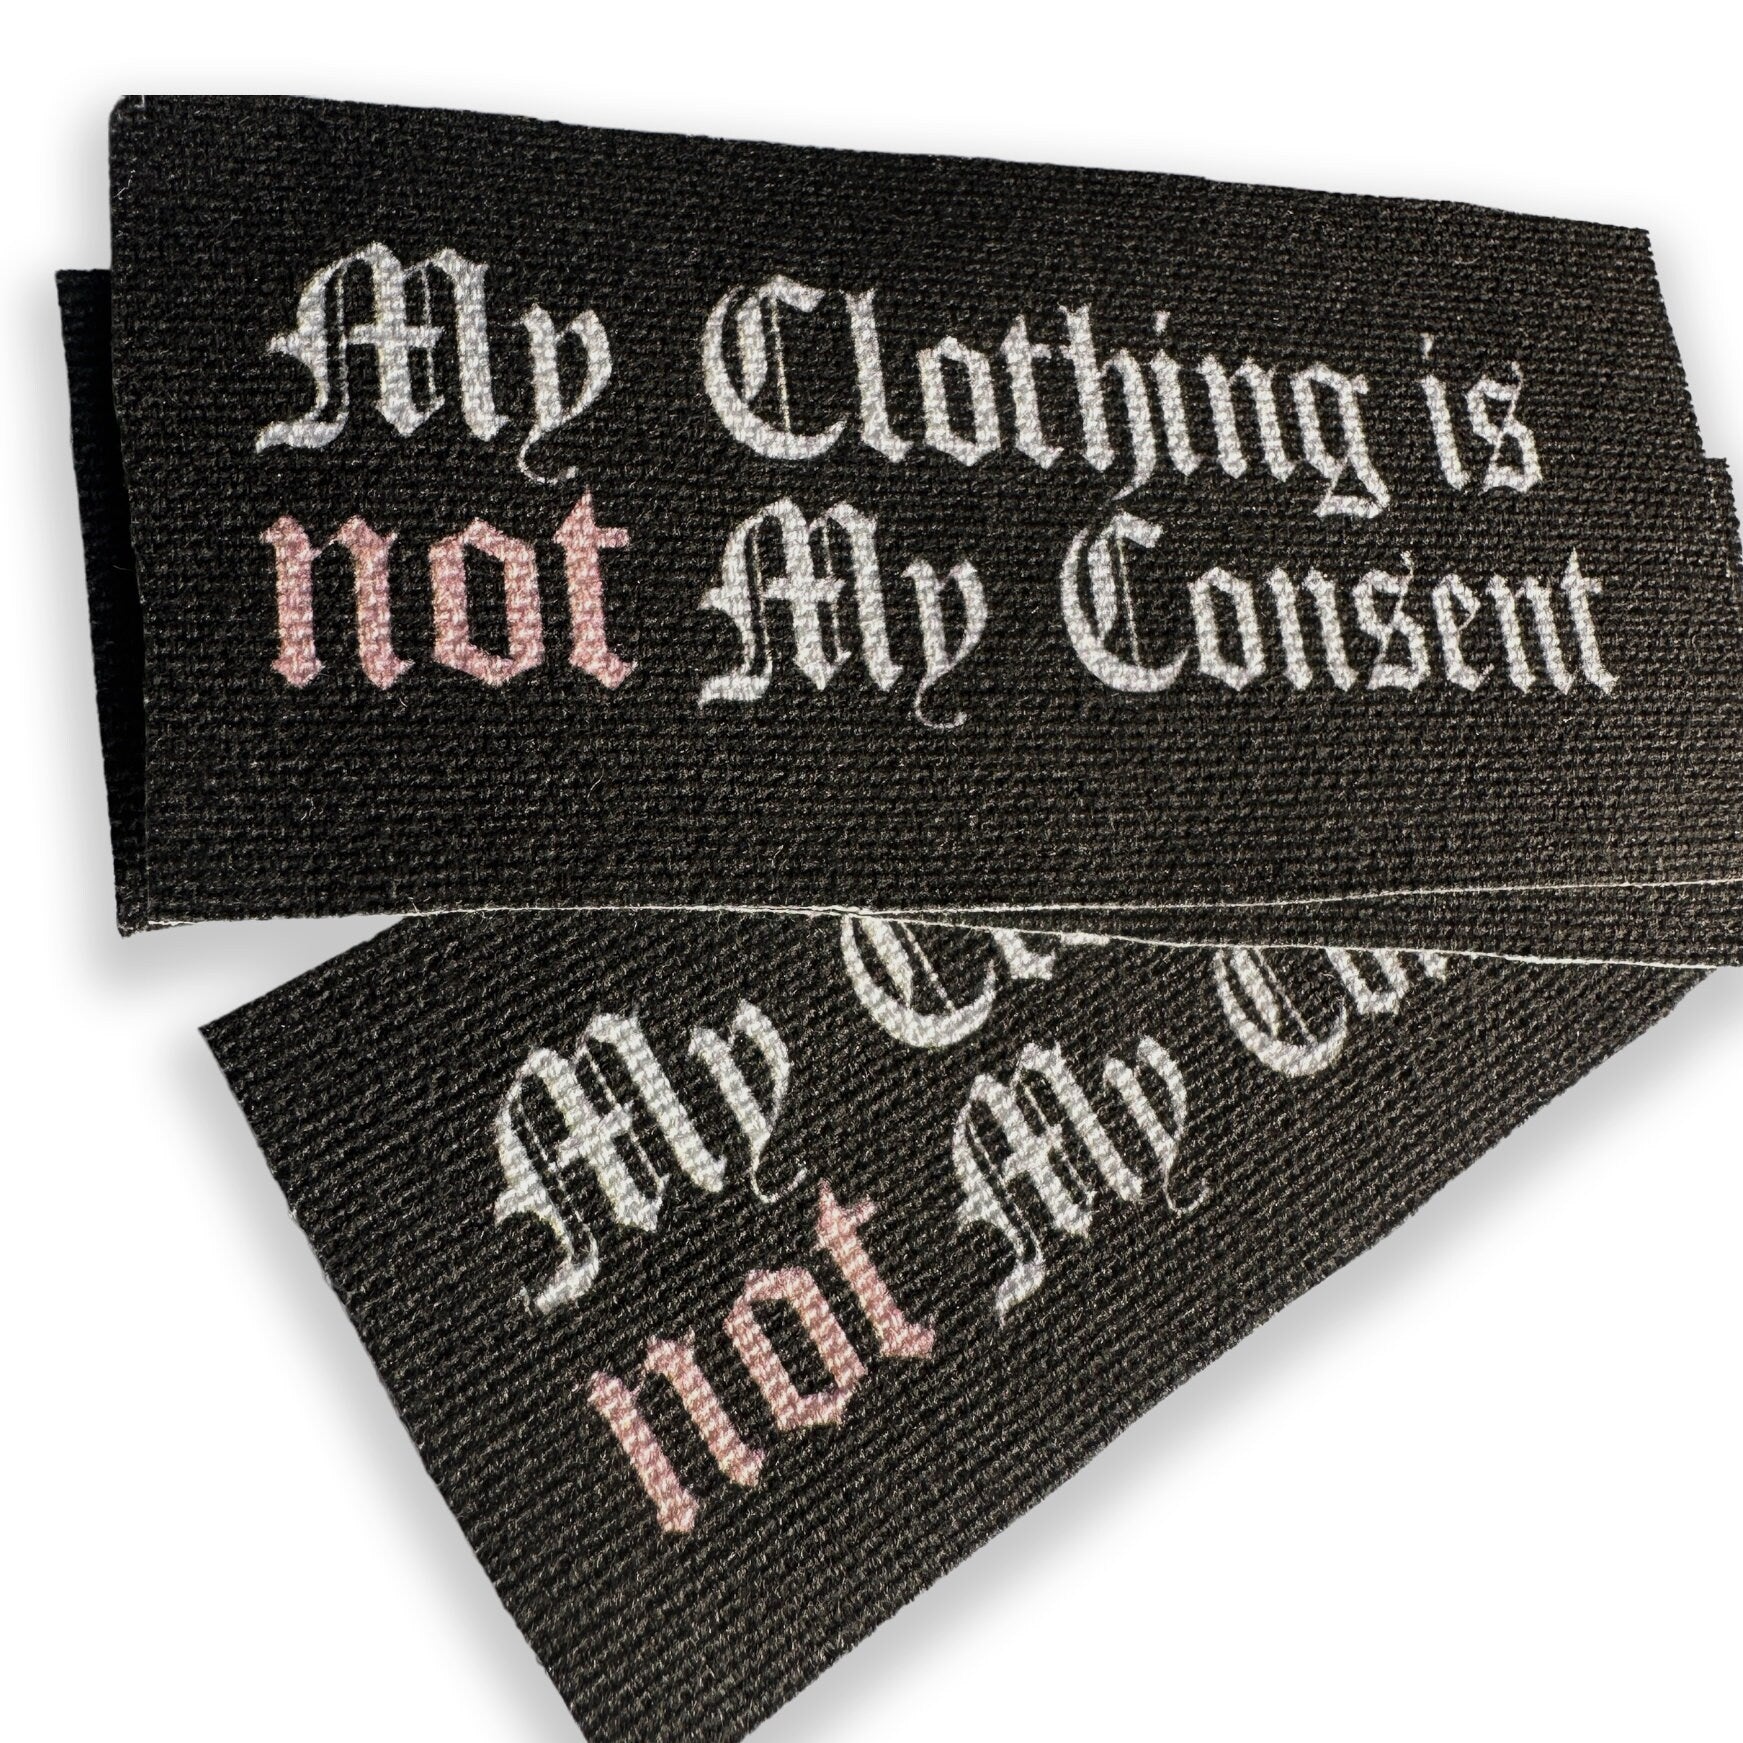 Consent Sewn On Patch | Punk Feminist Accessories DIY Handmade Horror Fabric Patches | My Clothing is Not My Consent | 4.25x2"